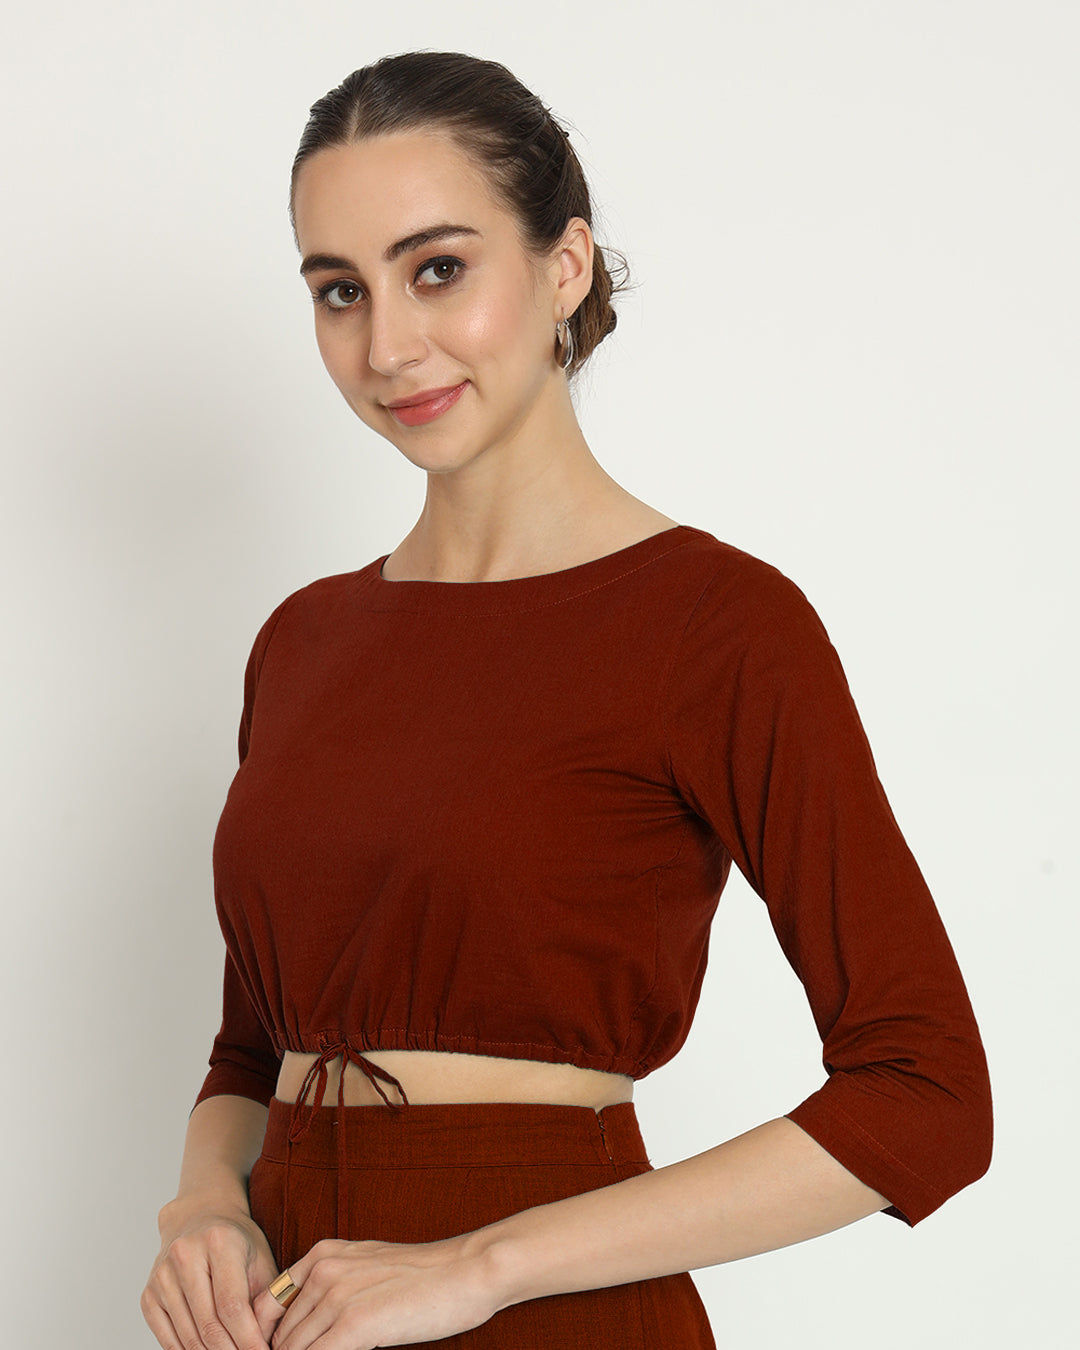 Russet Red Flow & Tie Blouse